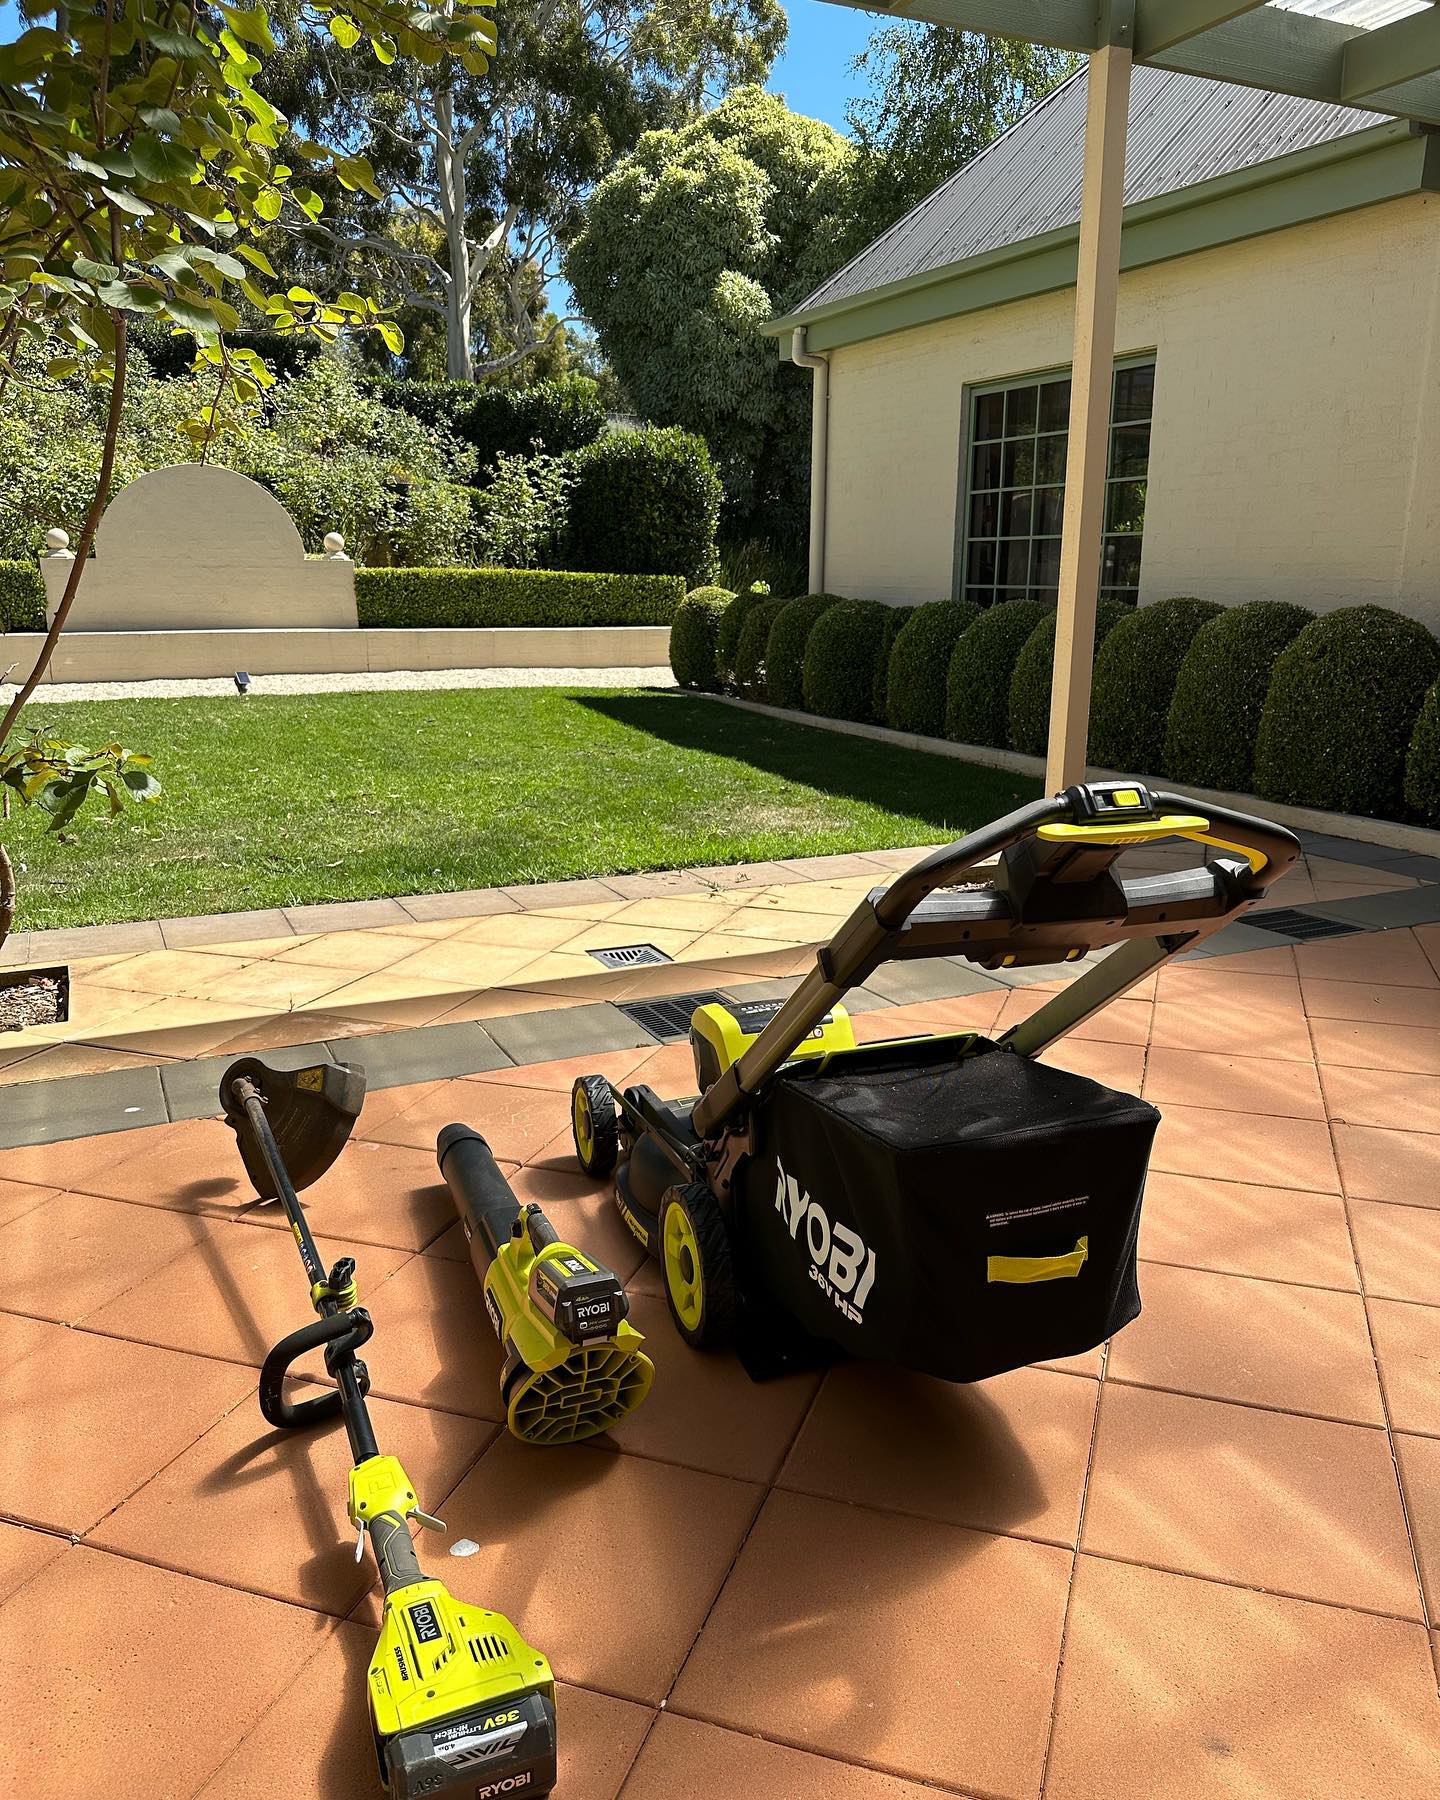 Edge ✅ Blow ✅ Mow ✅ . Sometimes sounds counterintuitive to do it in this order, but try it once and it all makes sense! ryobiau #ryobimade 36V collection doing the job very well!